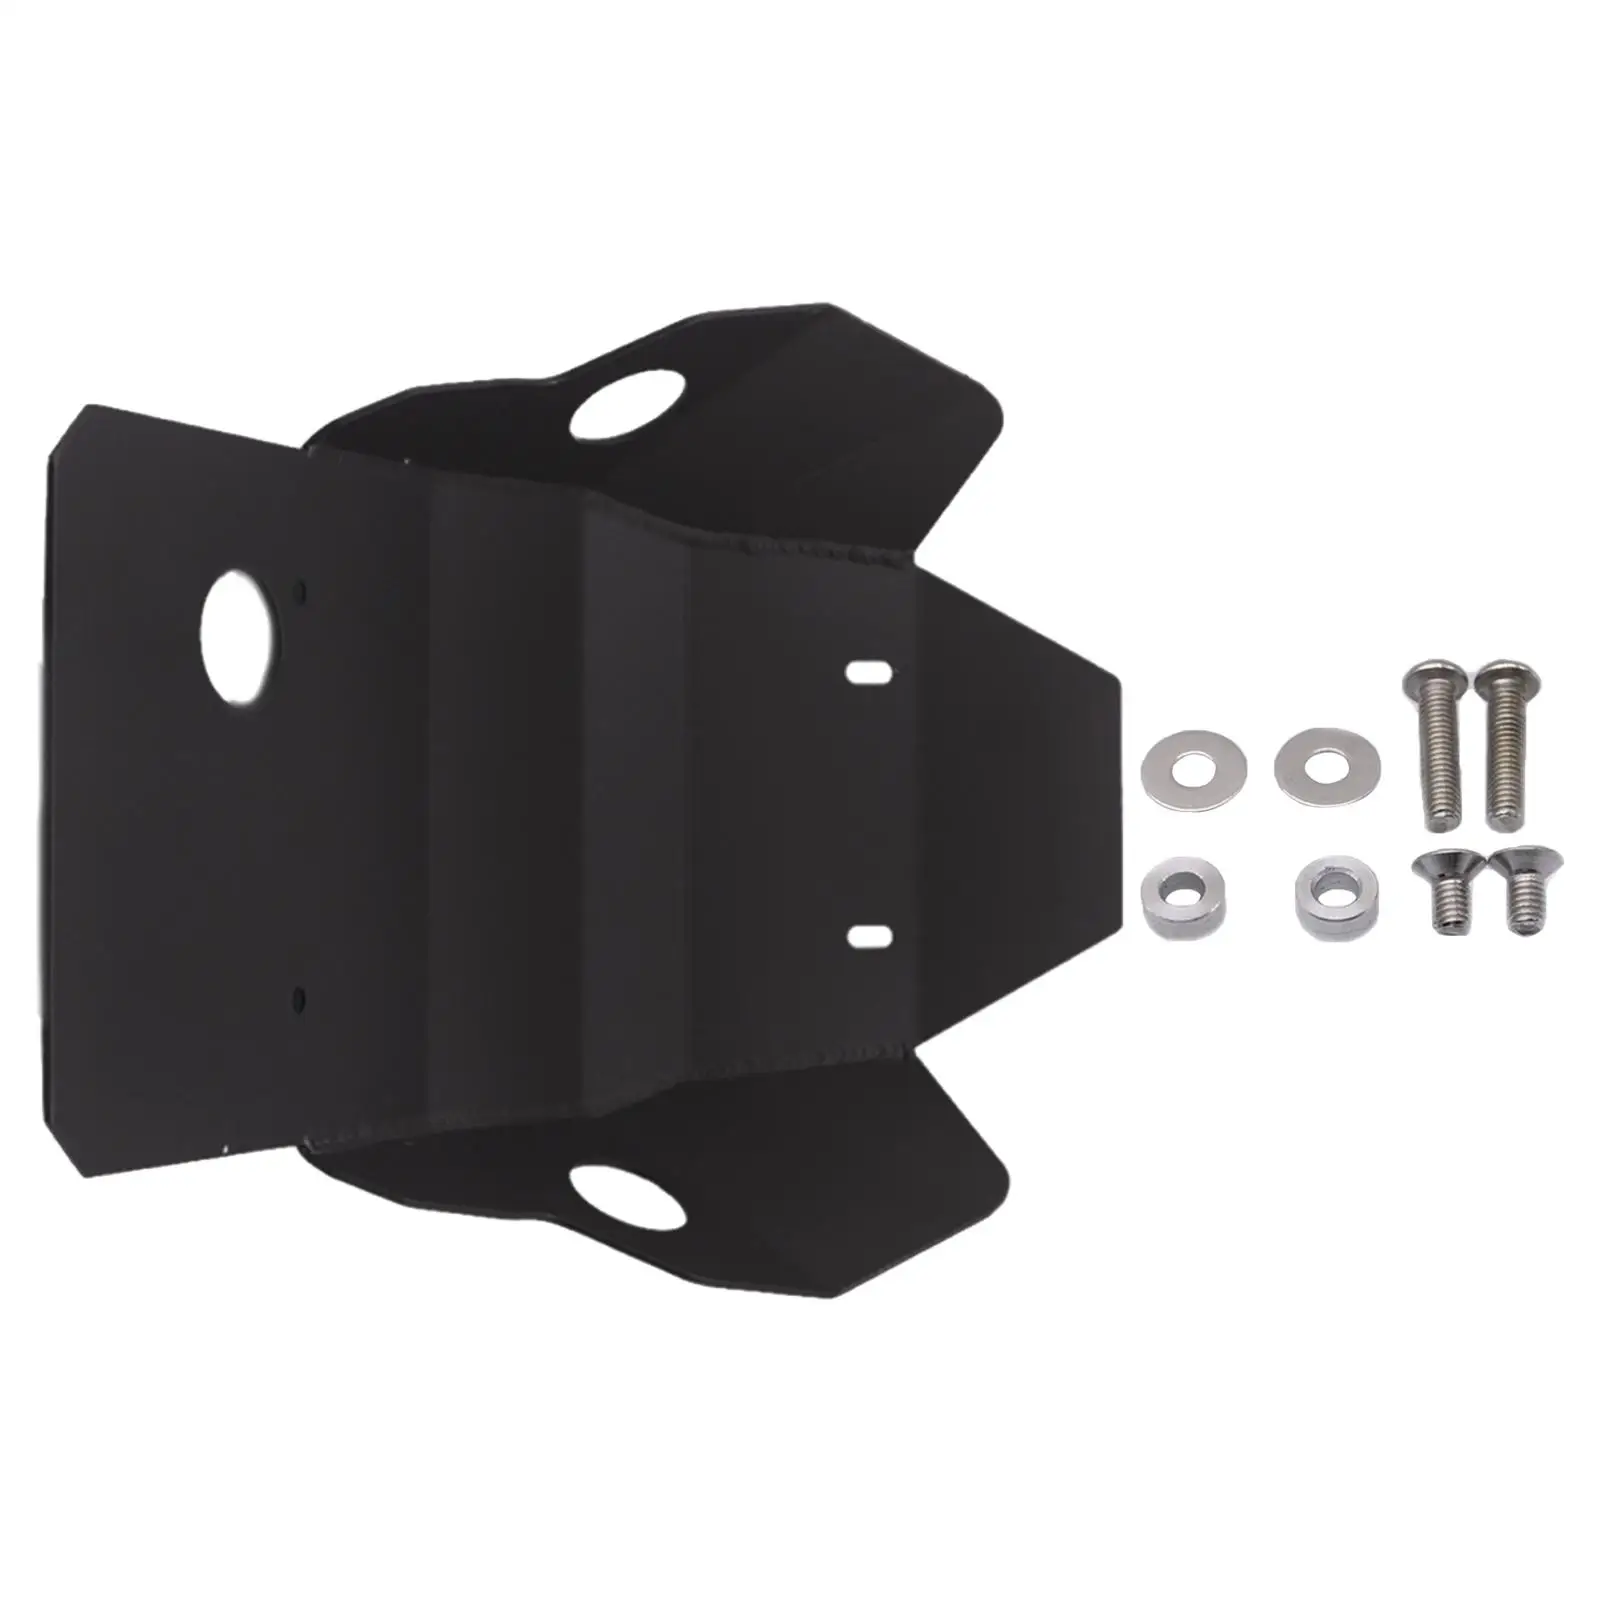 Engine Guard Cover Bottom Skid Plate Shield for Yamaha WR250X Replace Parts